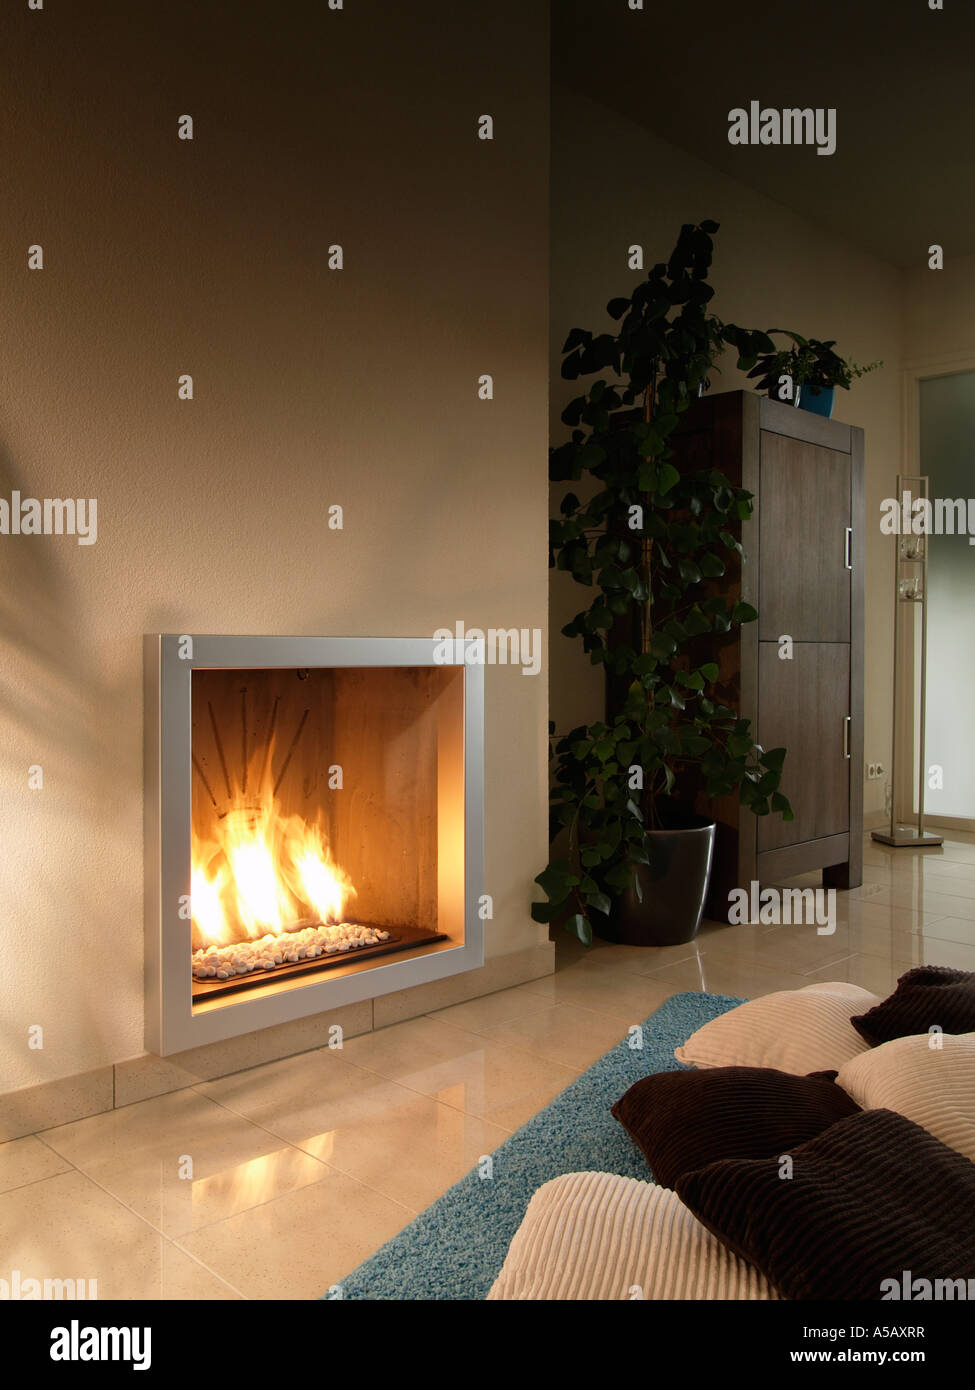 Modern style gas burning wall mounted fireplace in livingroom with tiled floor Stock Photo